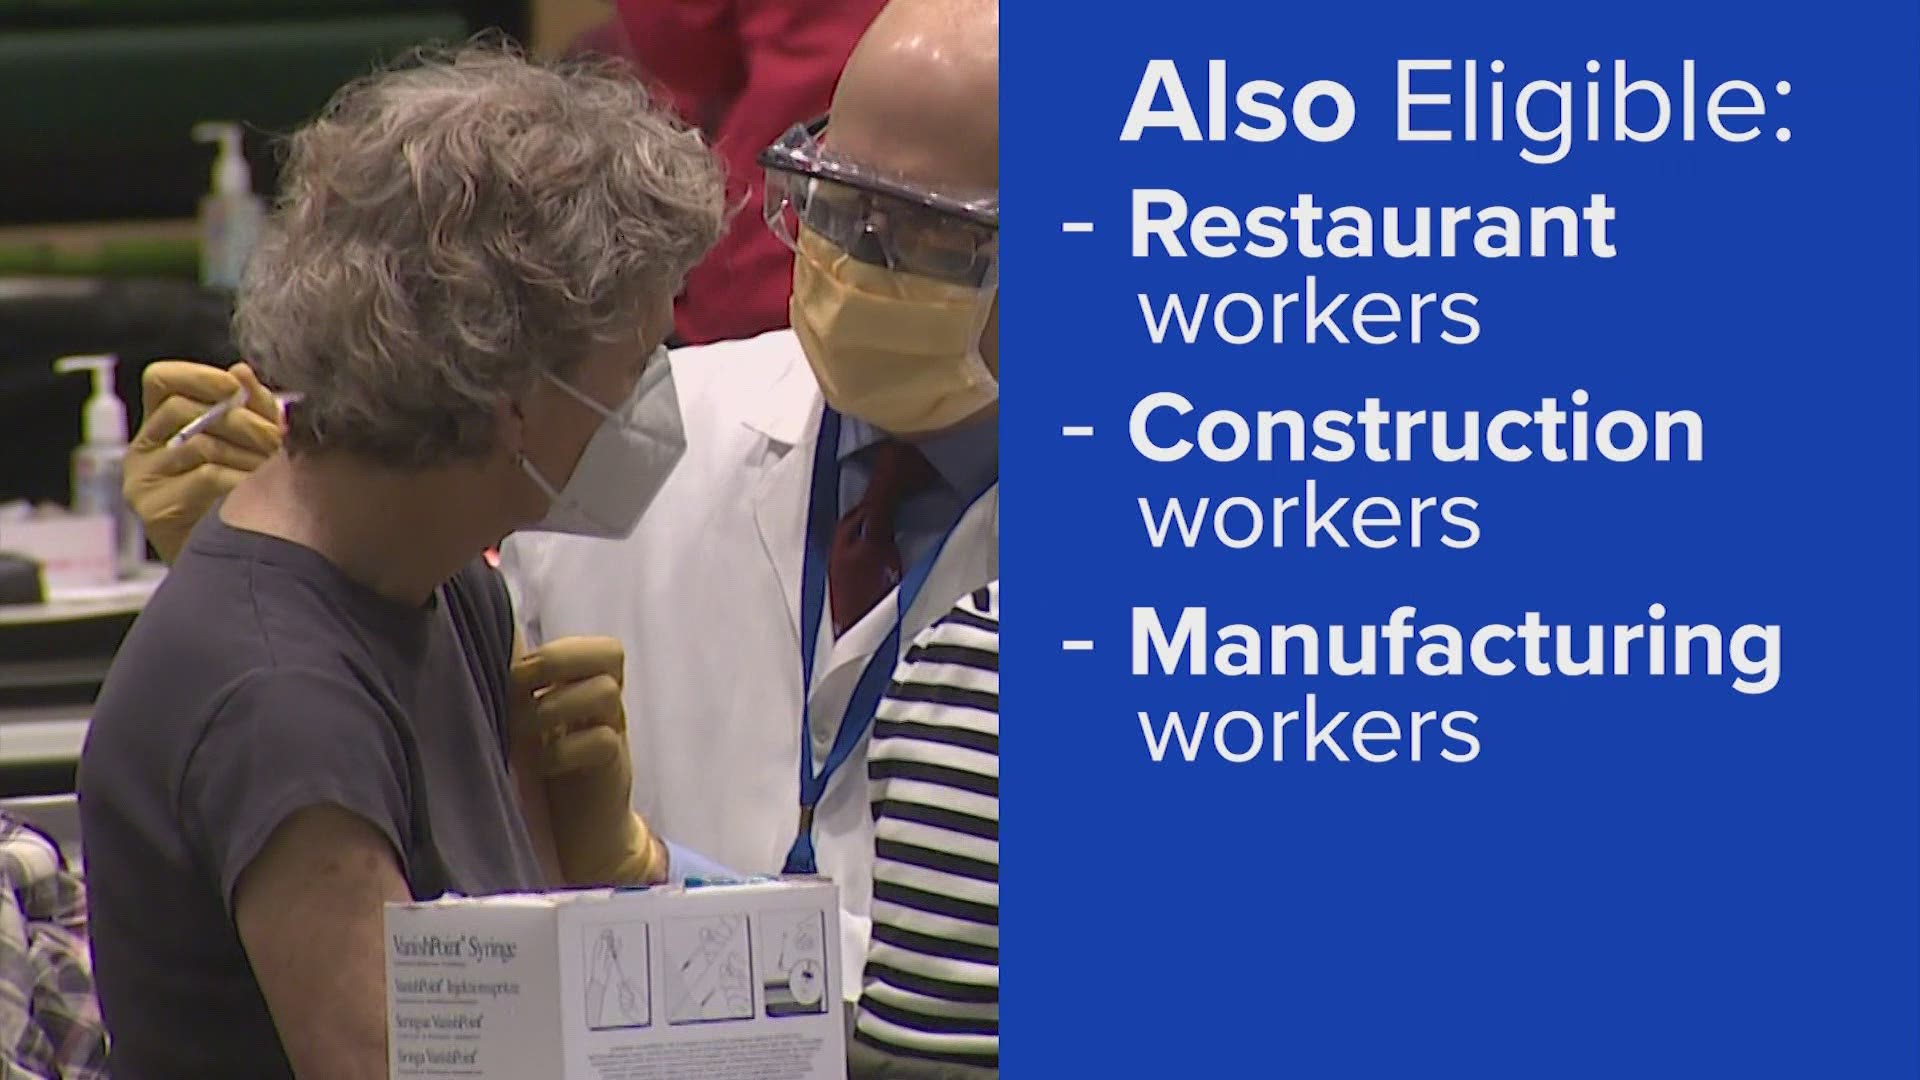 The next tiers of eligible Washingtonians include anyone 60 and older and workers in congregate settings, including restaurant workers.